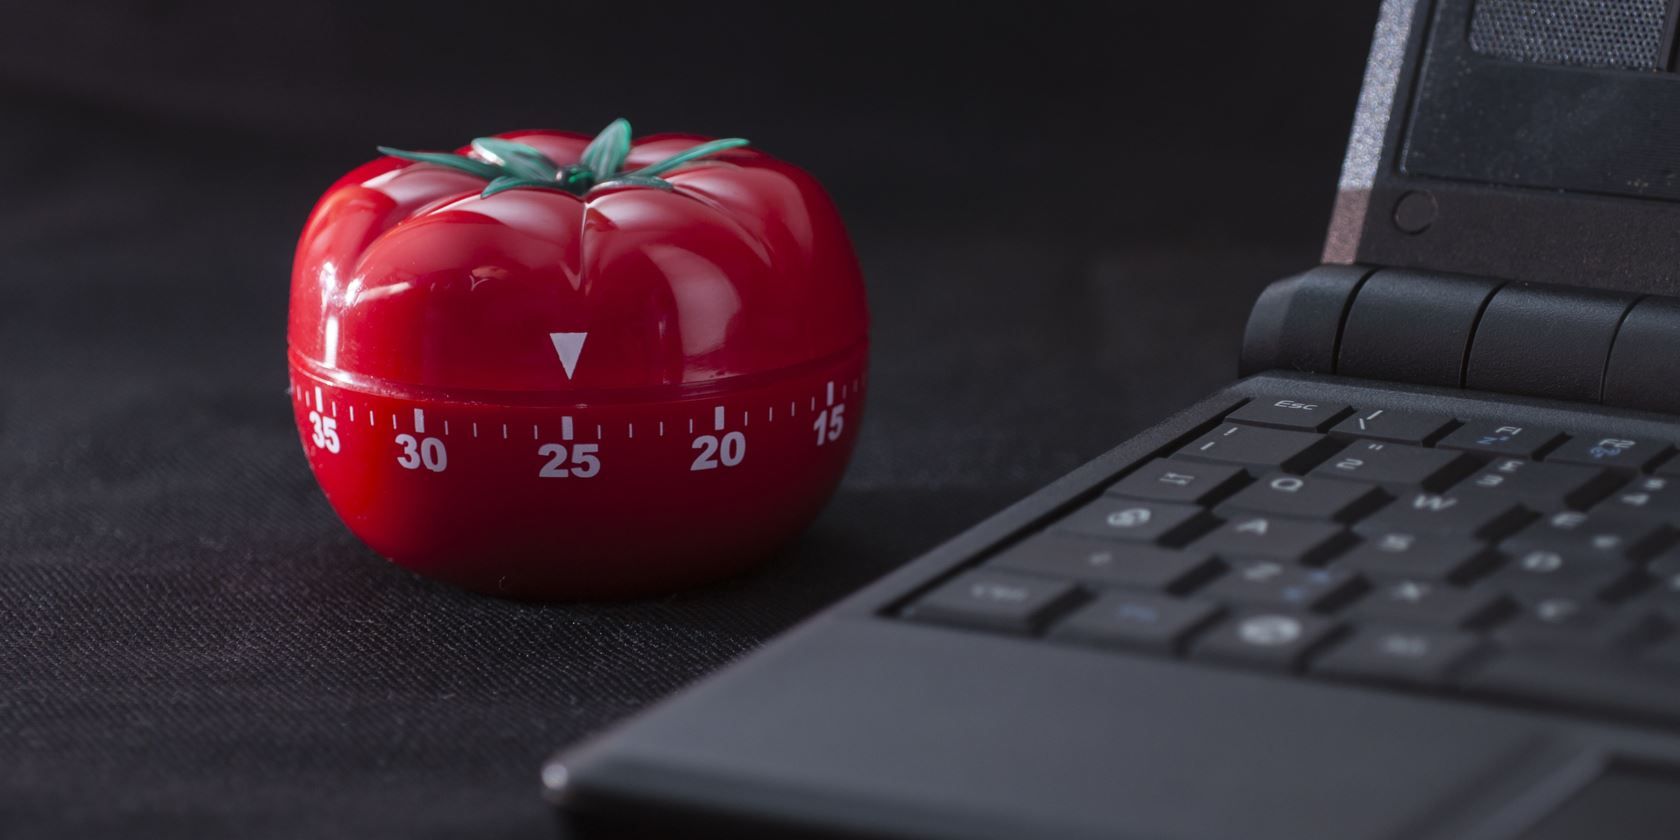 pomodoro software for pc free